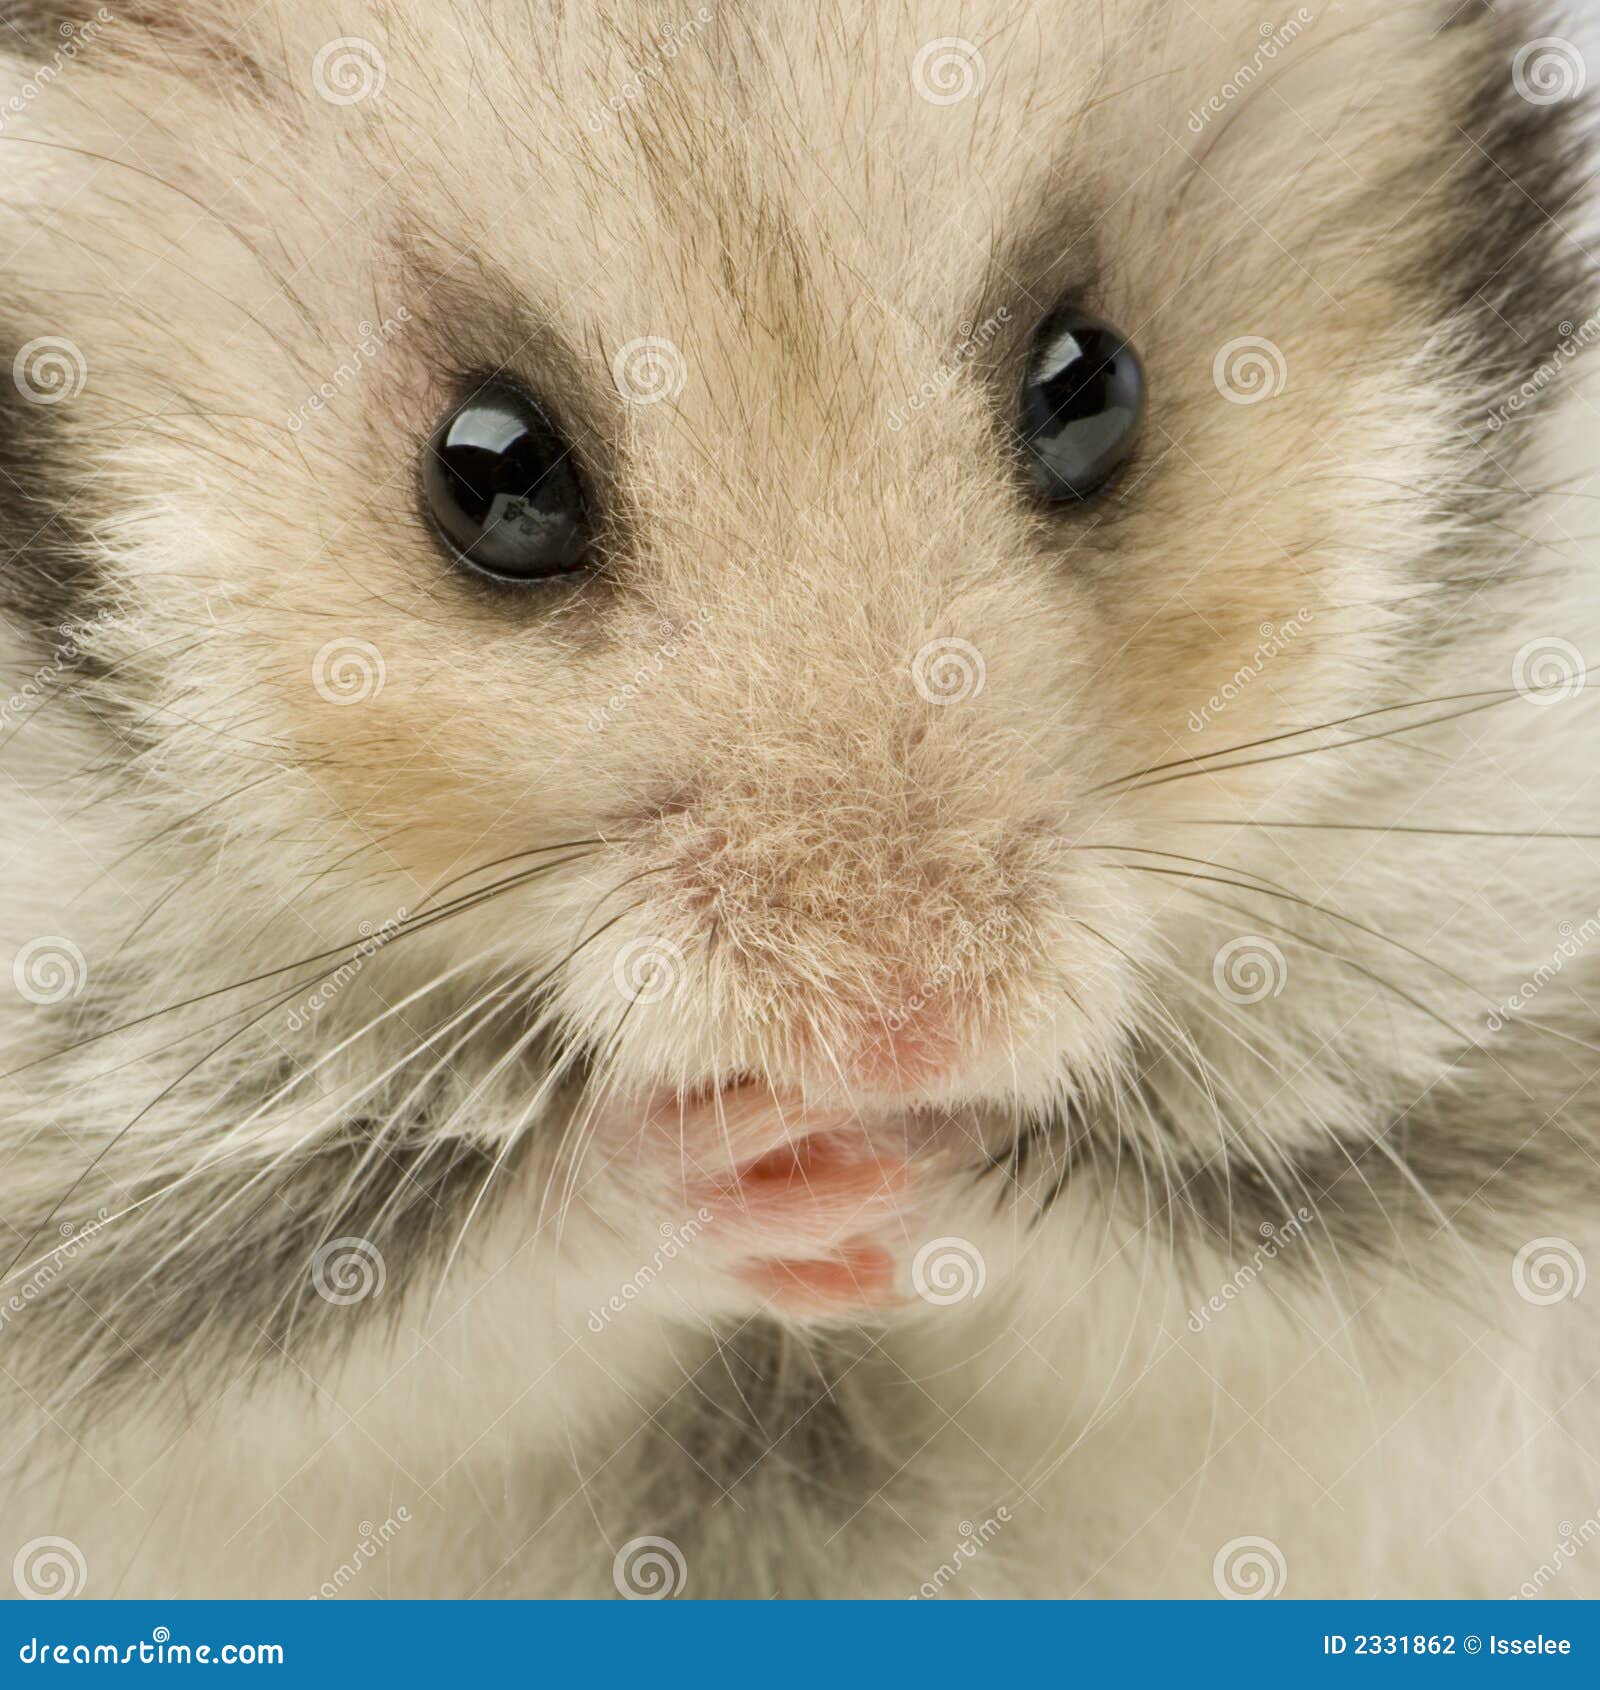 Hamster stock photo. Image of dating, looking, furry, mice